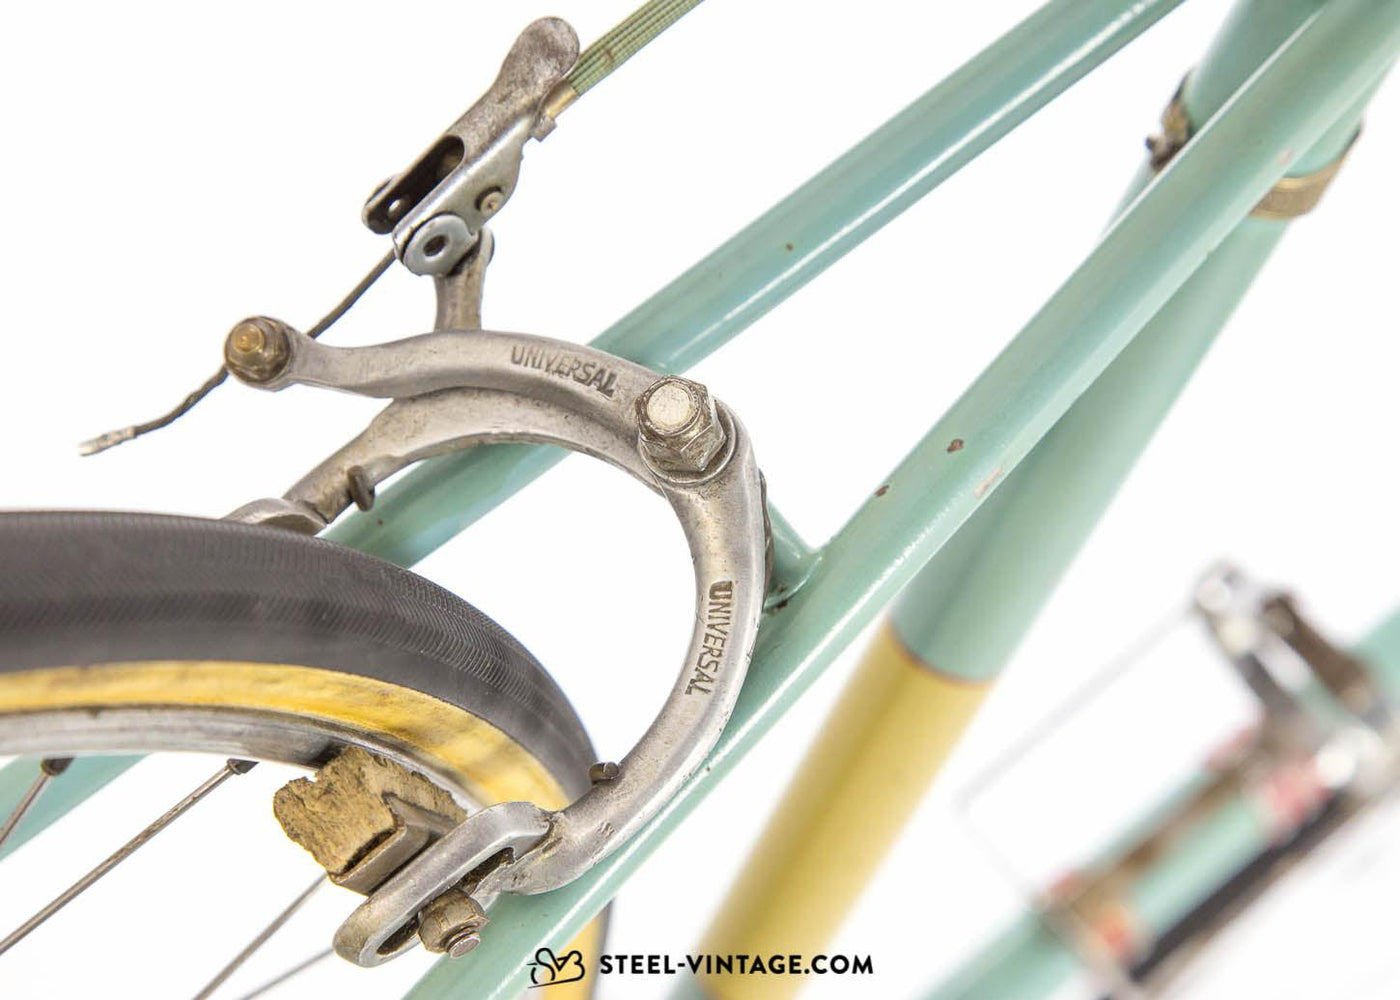 Bianchi Folgore Classic Bicycle 1940s - Steel Vintage Bikes